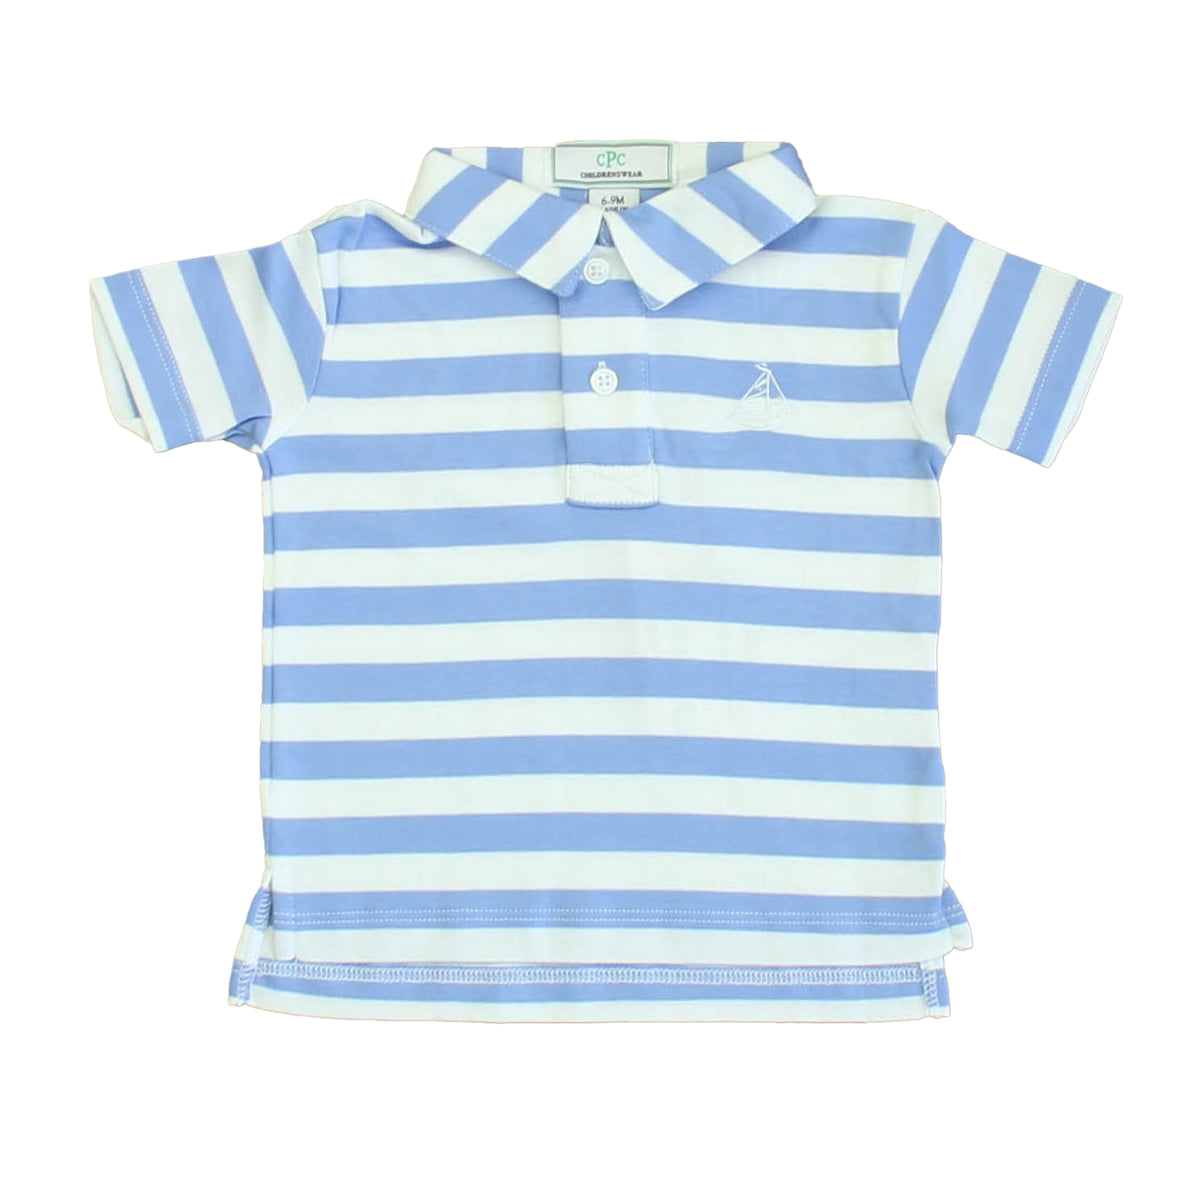 New with Tags: Cornflower Blue | Bright White Top size: 6-9 Months -- FINAL SALE